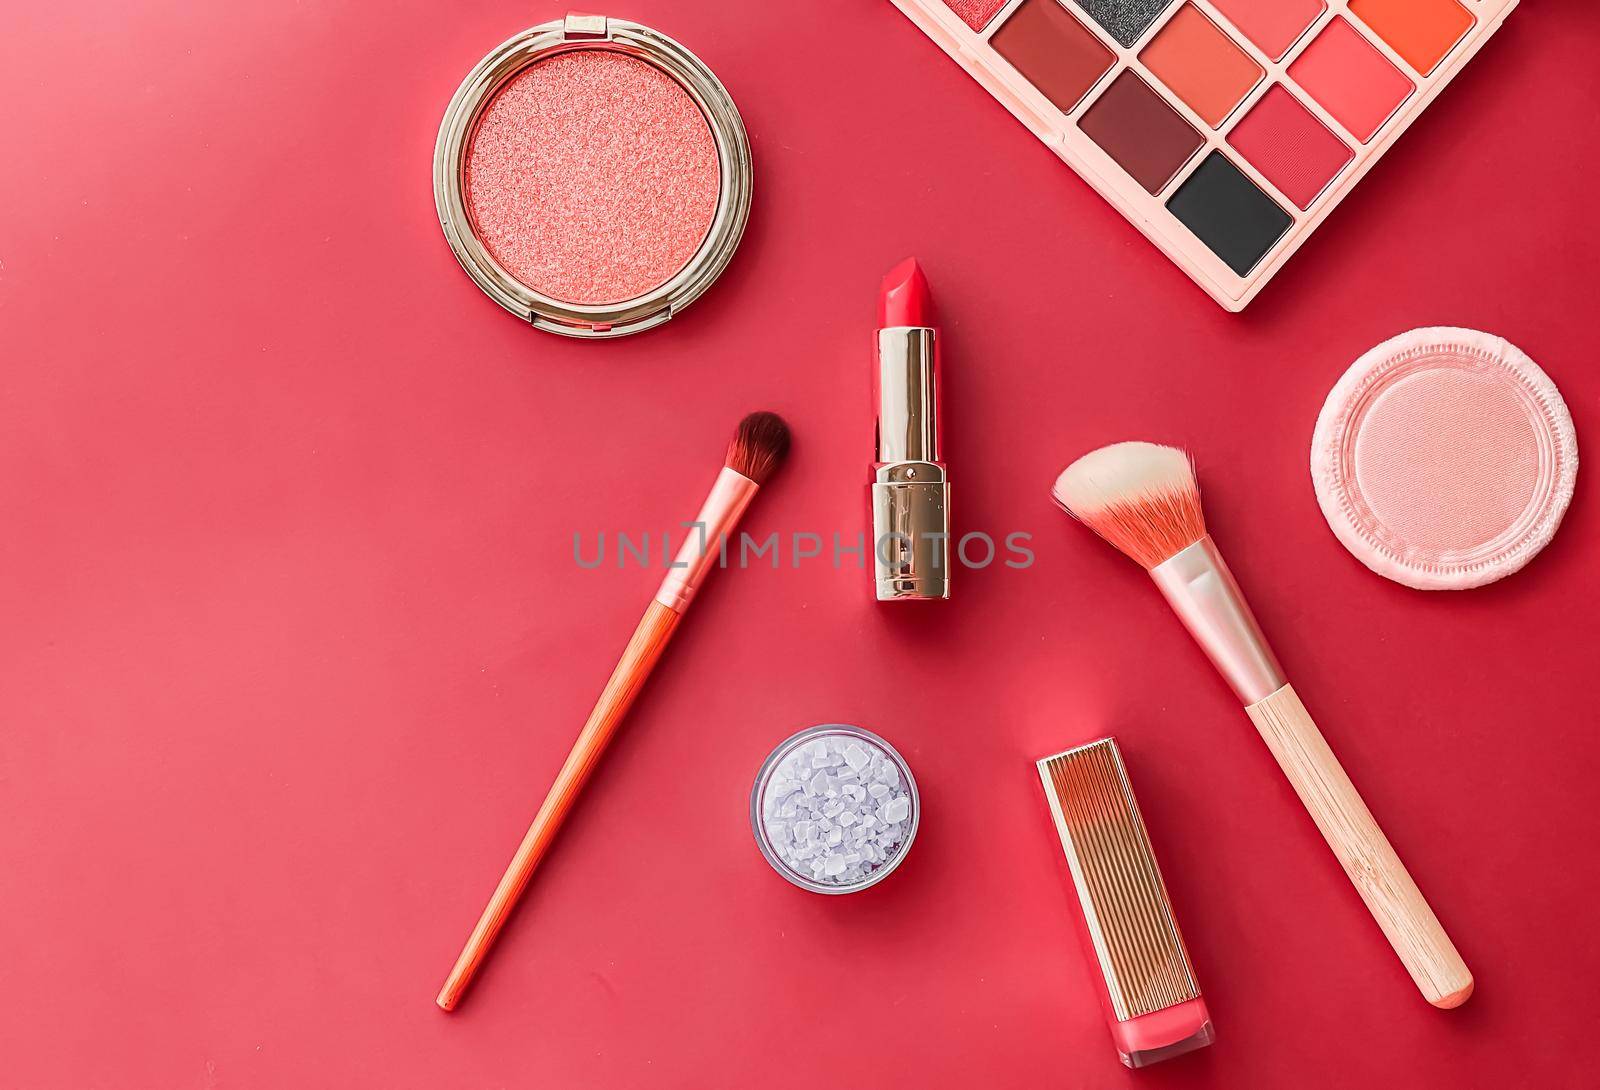 Beauty, make-up and cosmetics flatlay design with copyspace, cosmetic products and makeup tools on coral background, girly and feminine style concept